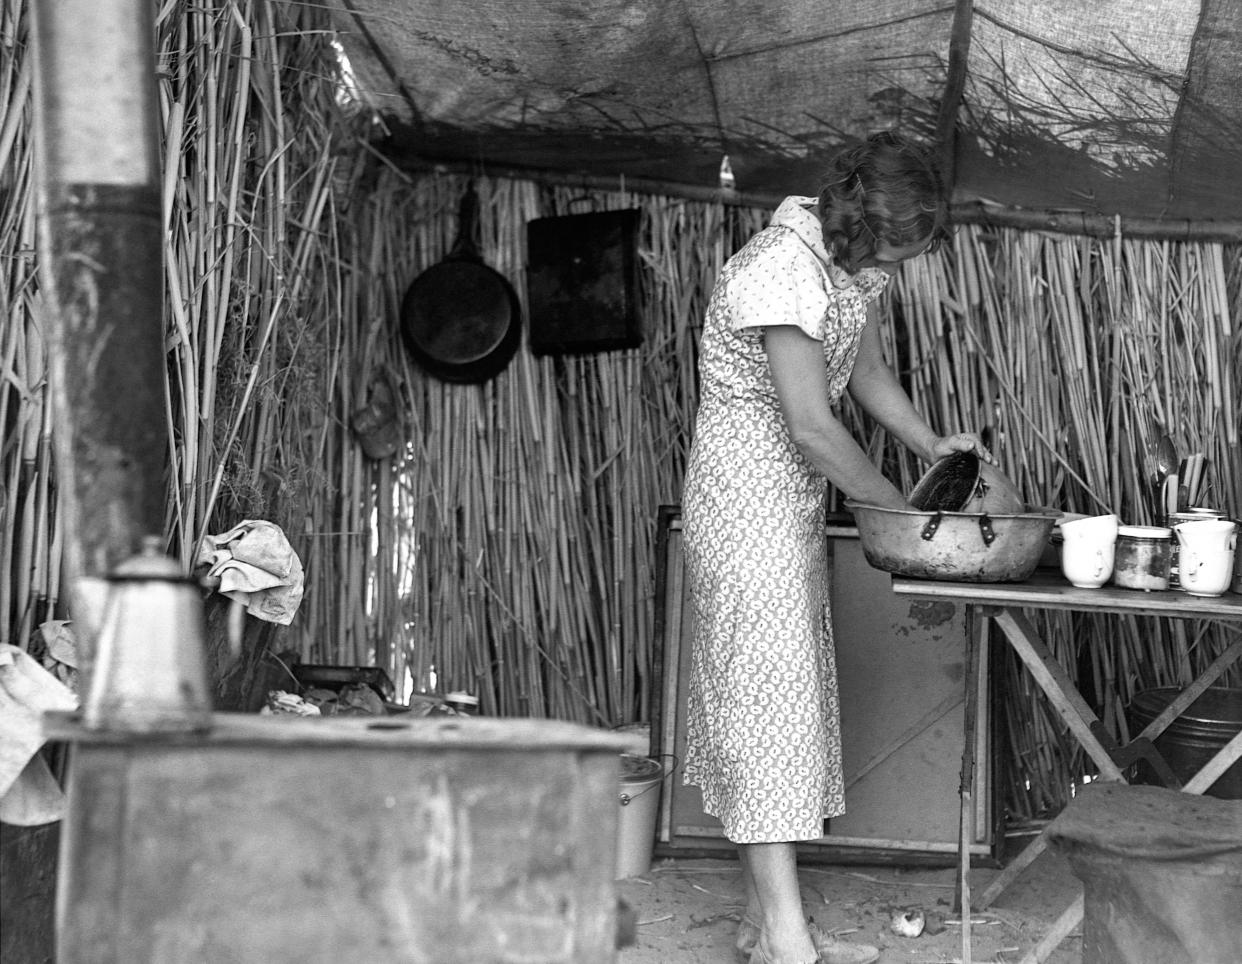 A woman cooking in a camp for migrant agricultrual workers. Imperial Valley, California, ca. February-March 1937.